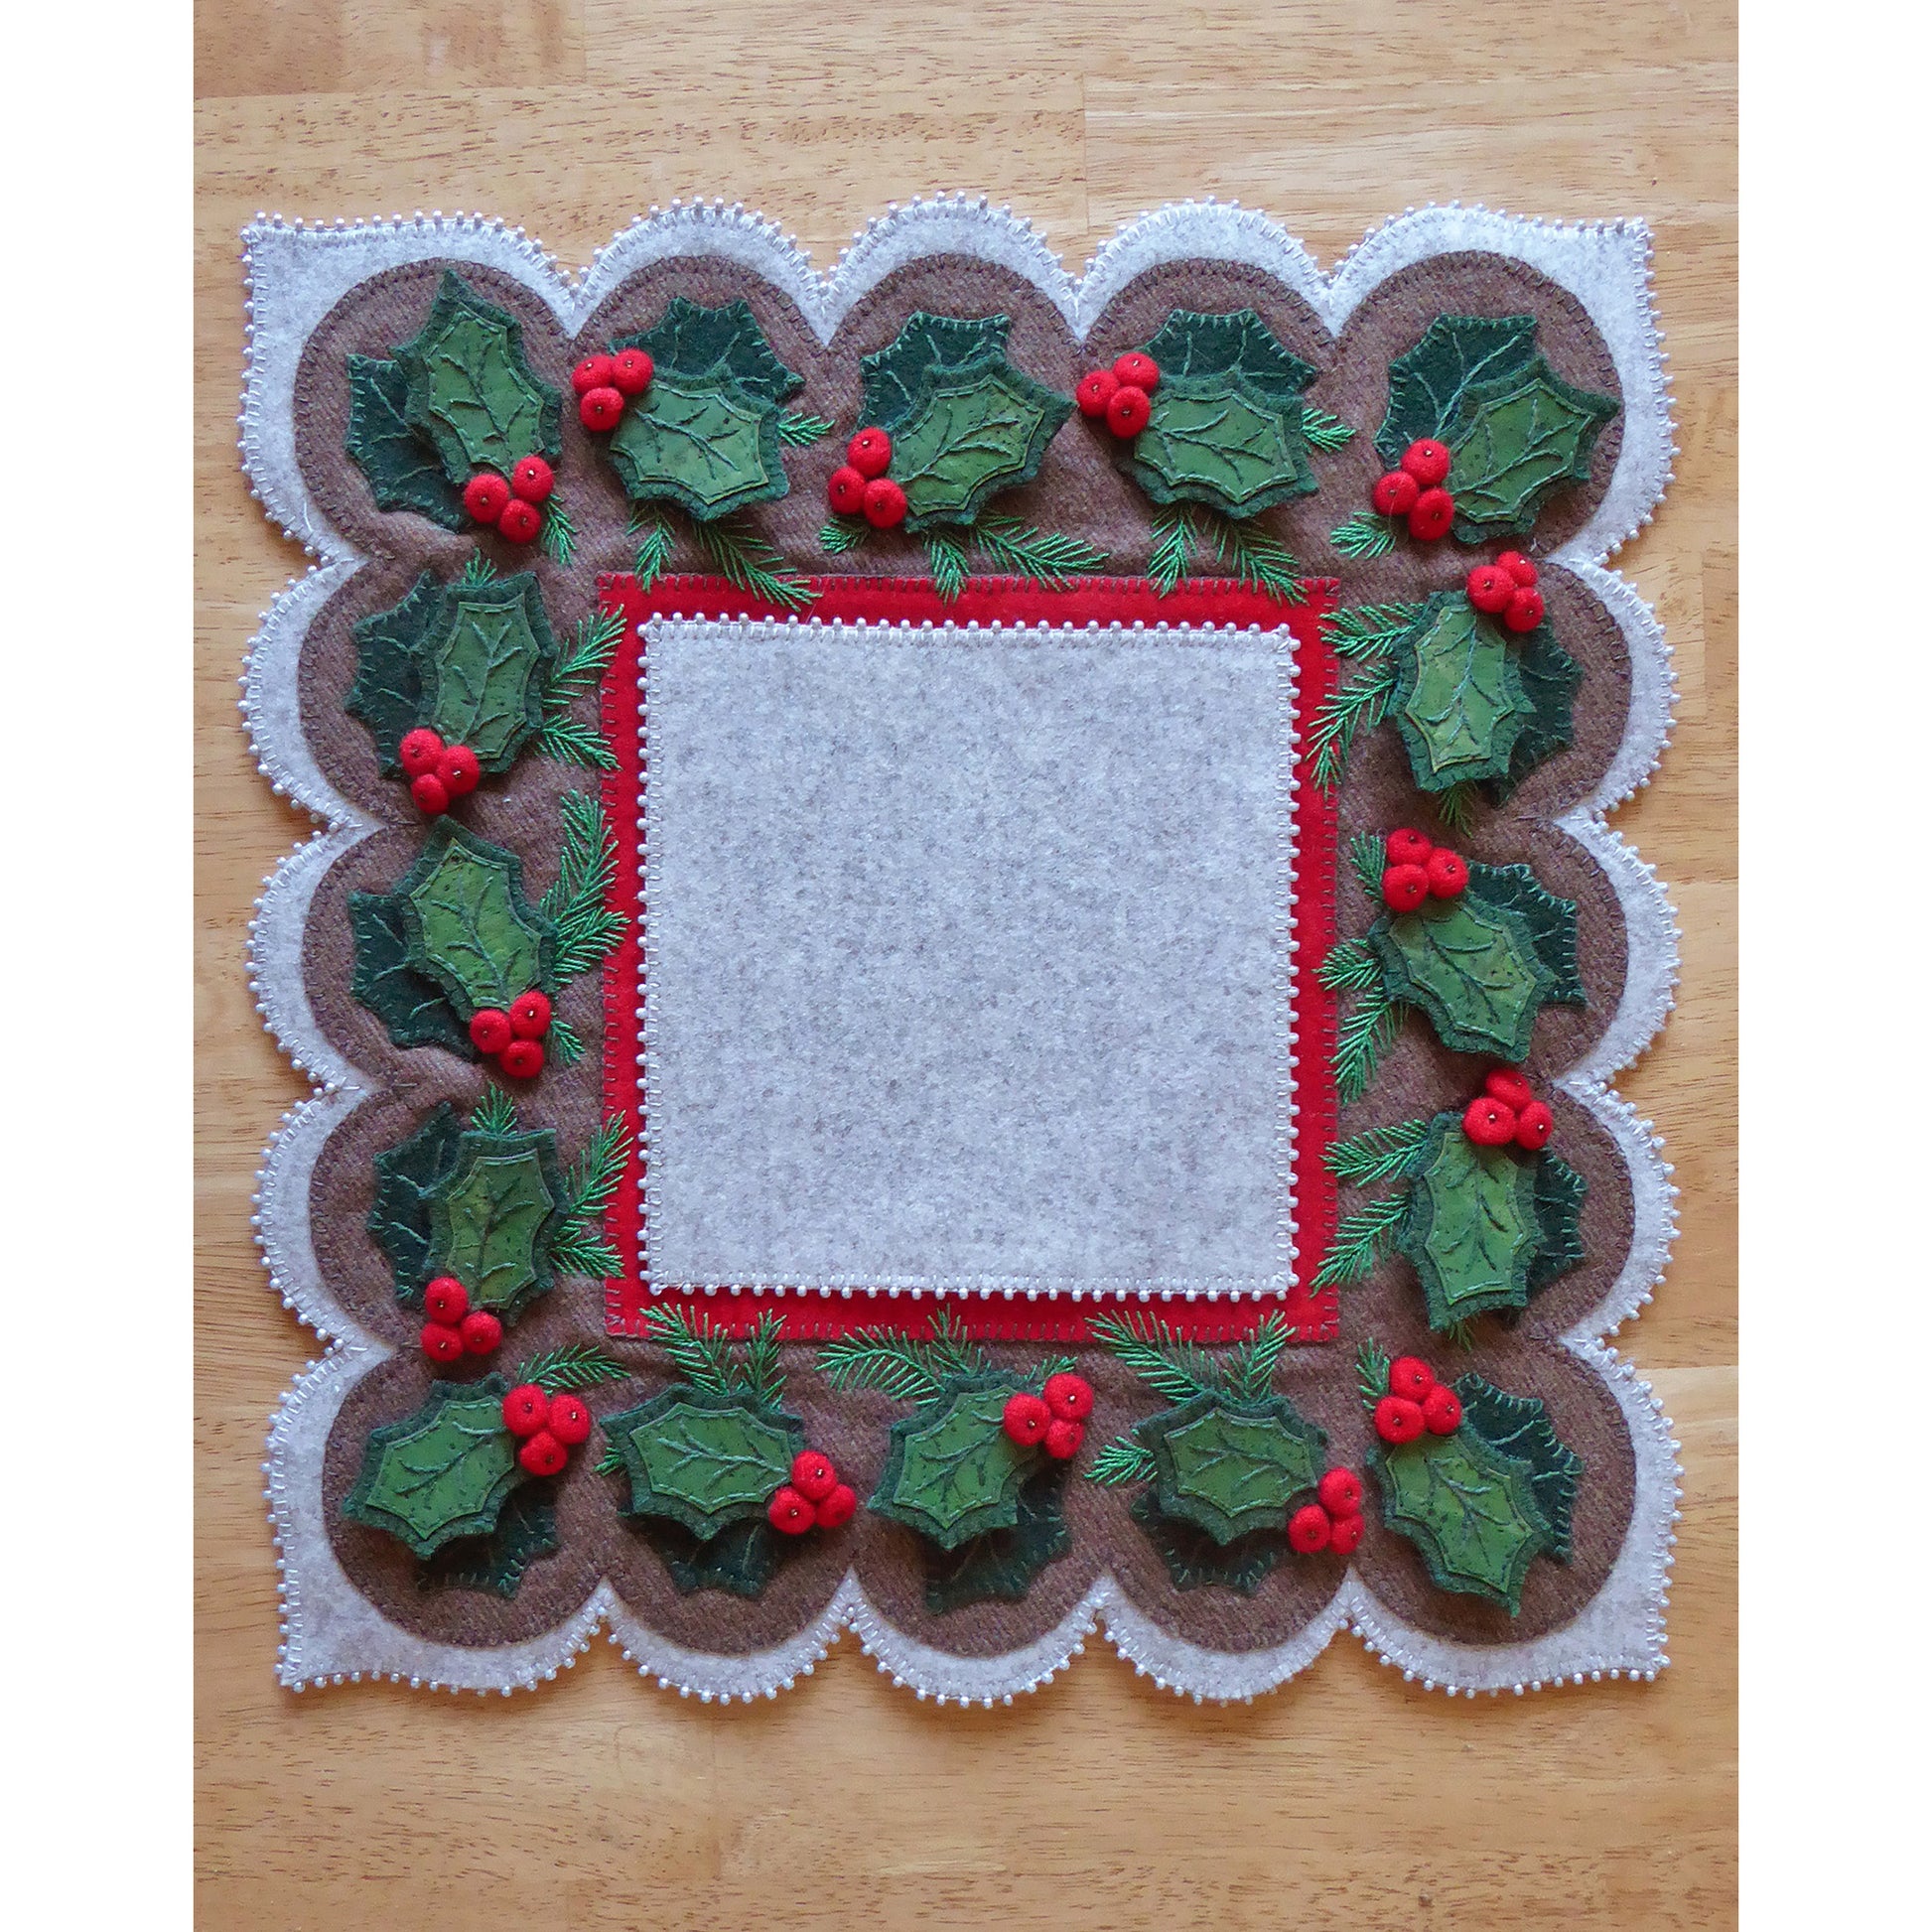 A festive table runner with holly leaves, perfect for adding a touch of Christmas cheer to your dining table.